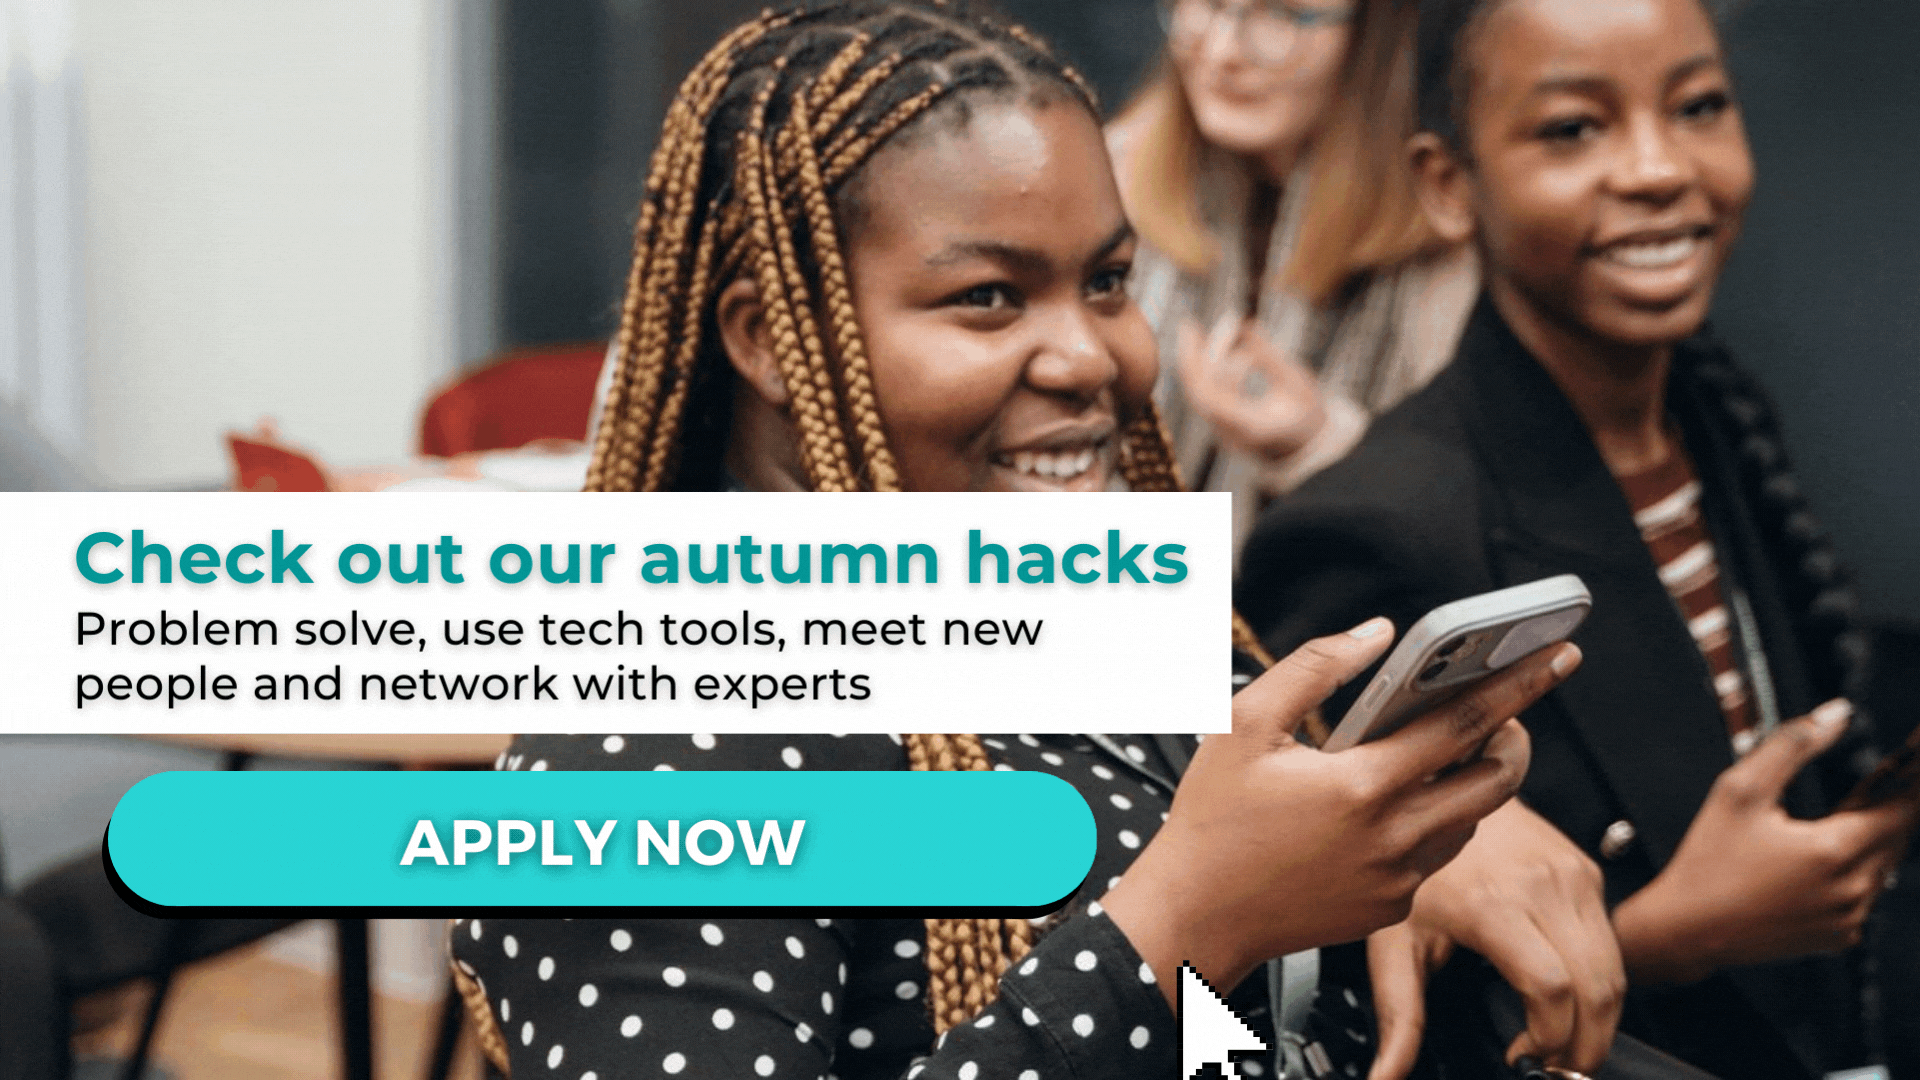 Check out our autumn hacks side bar